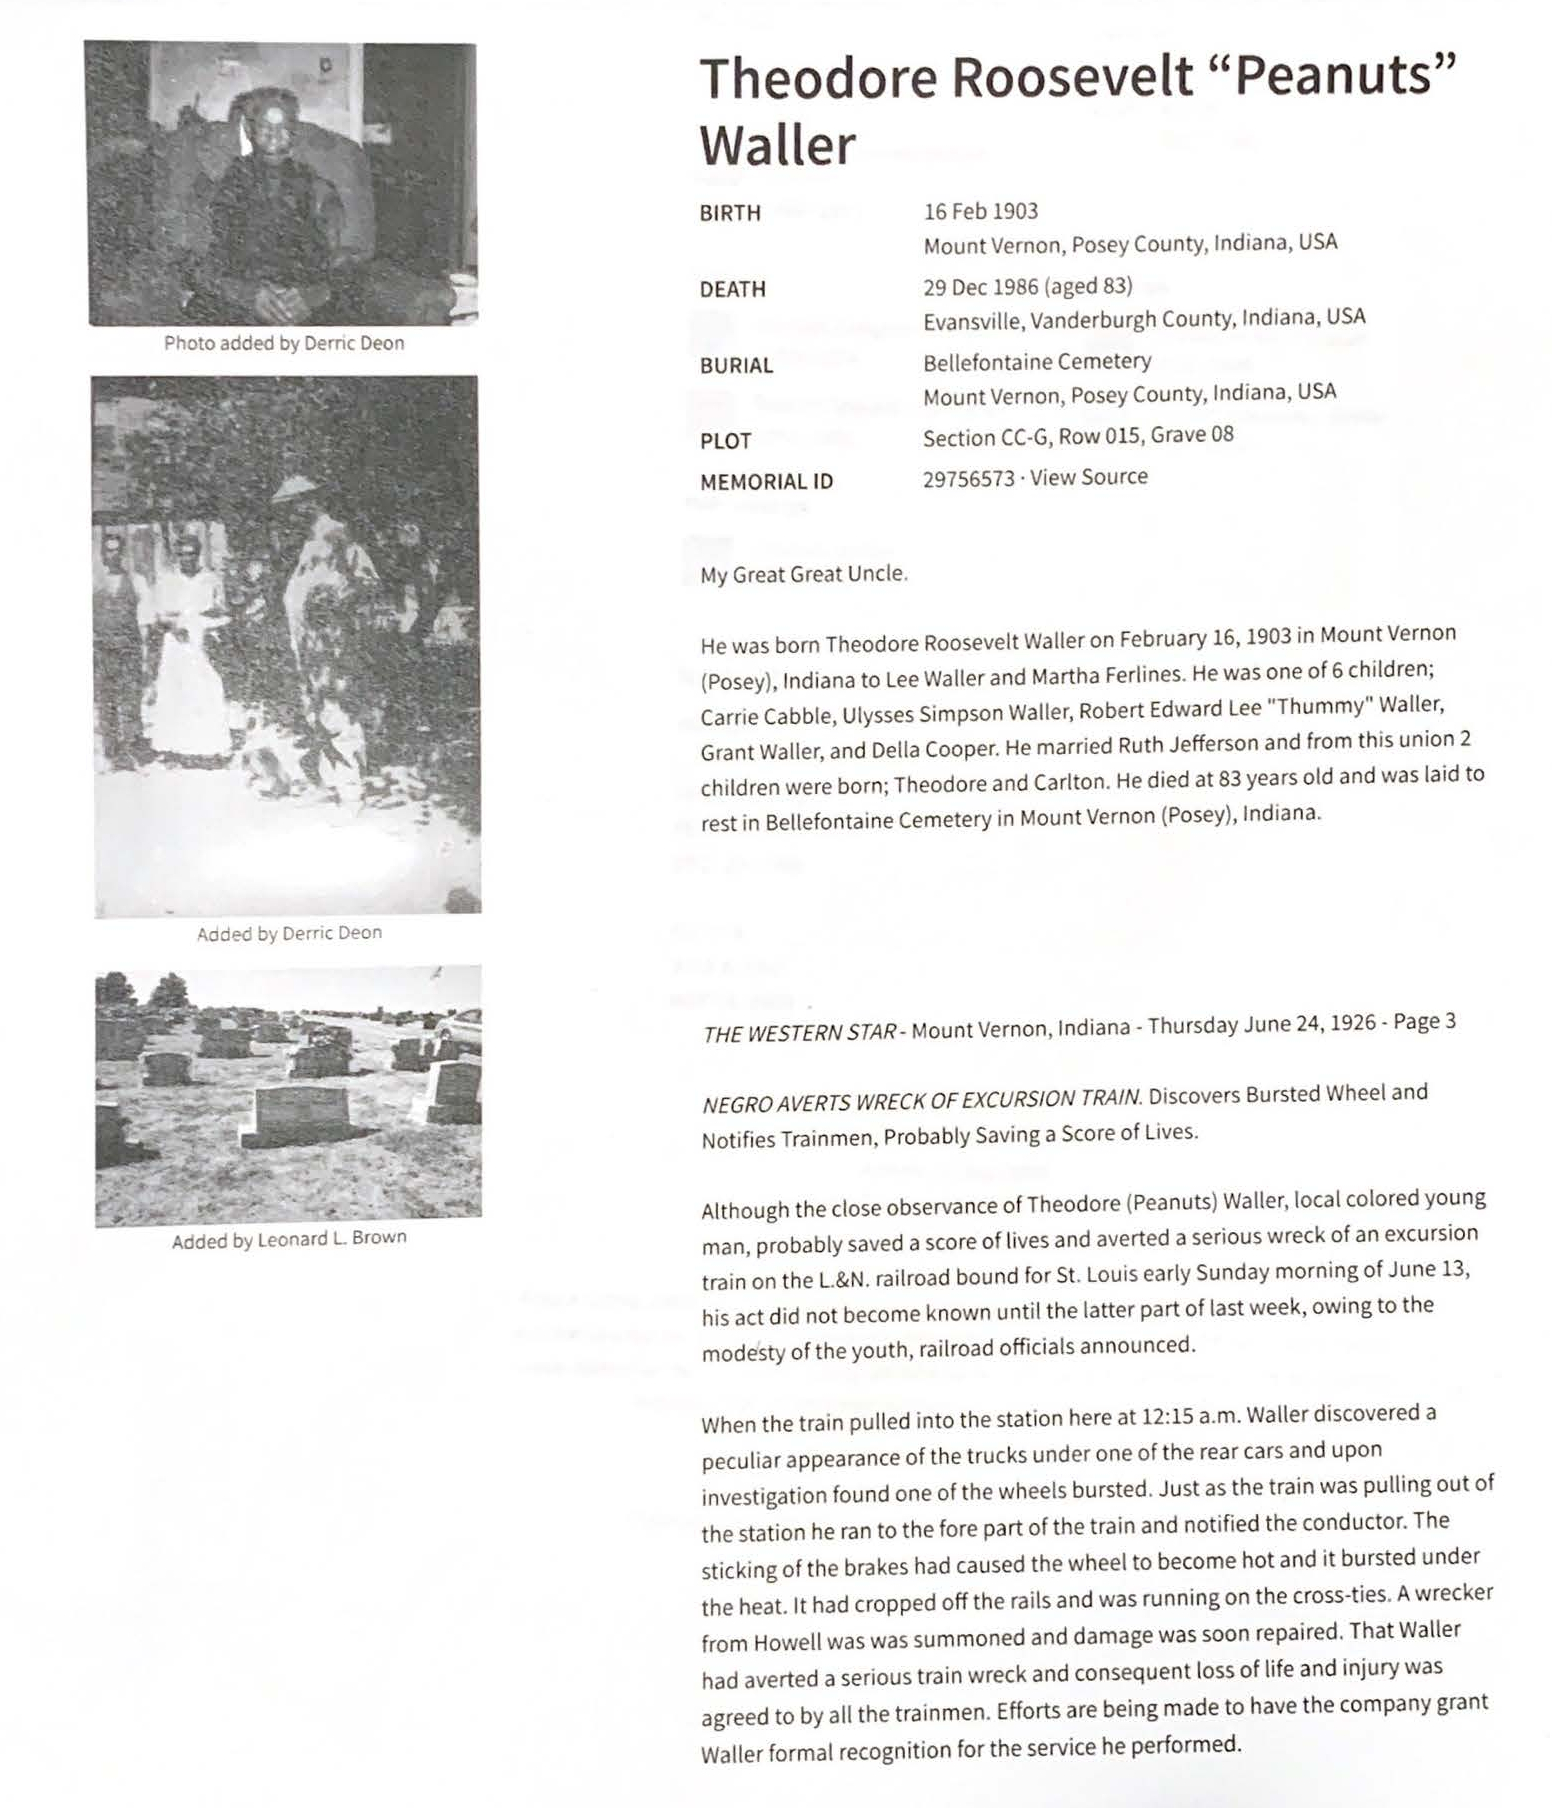 Family history information on Theodore Roosevelt "Peanuts" Waller.